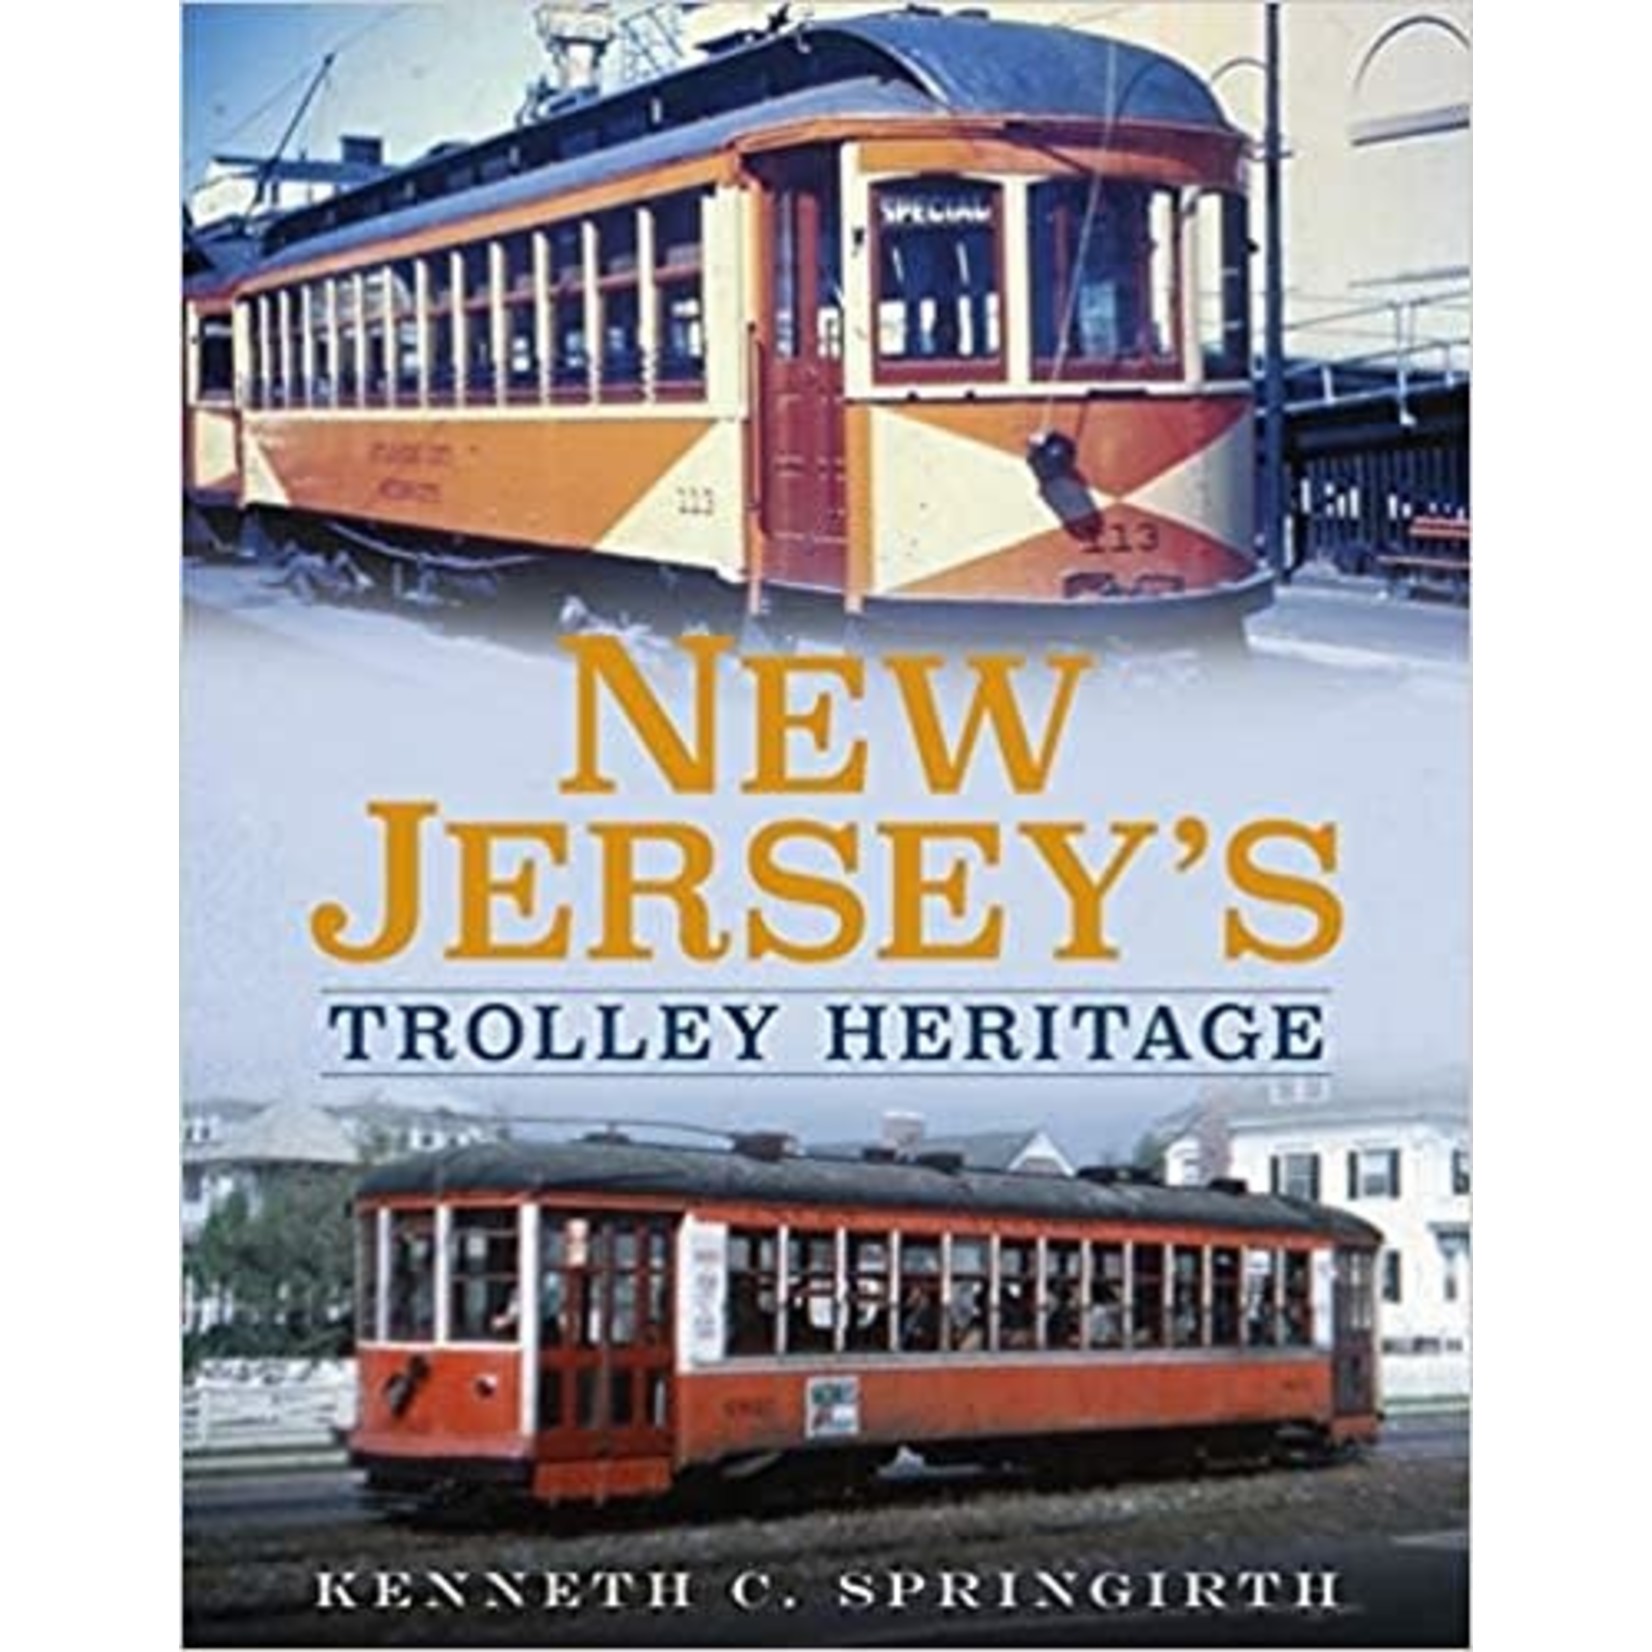 America Through Time New Jersey's Trolley Heritage *SIGNED